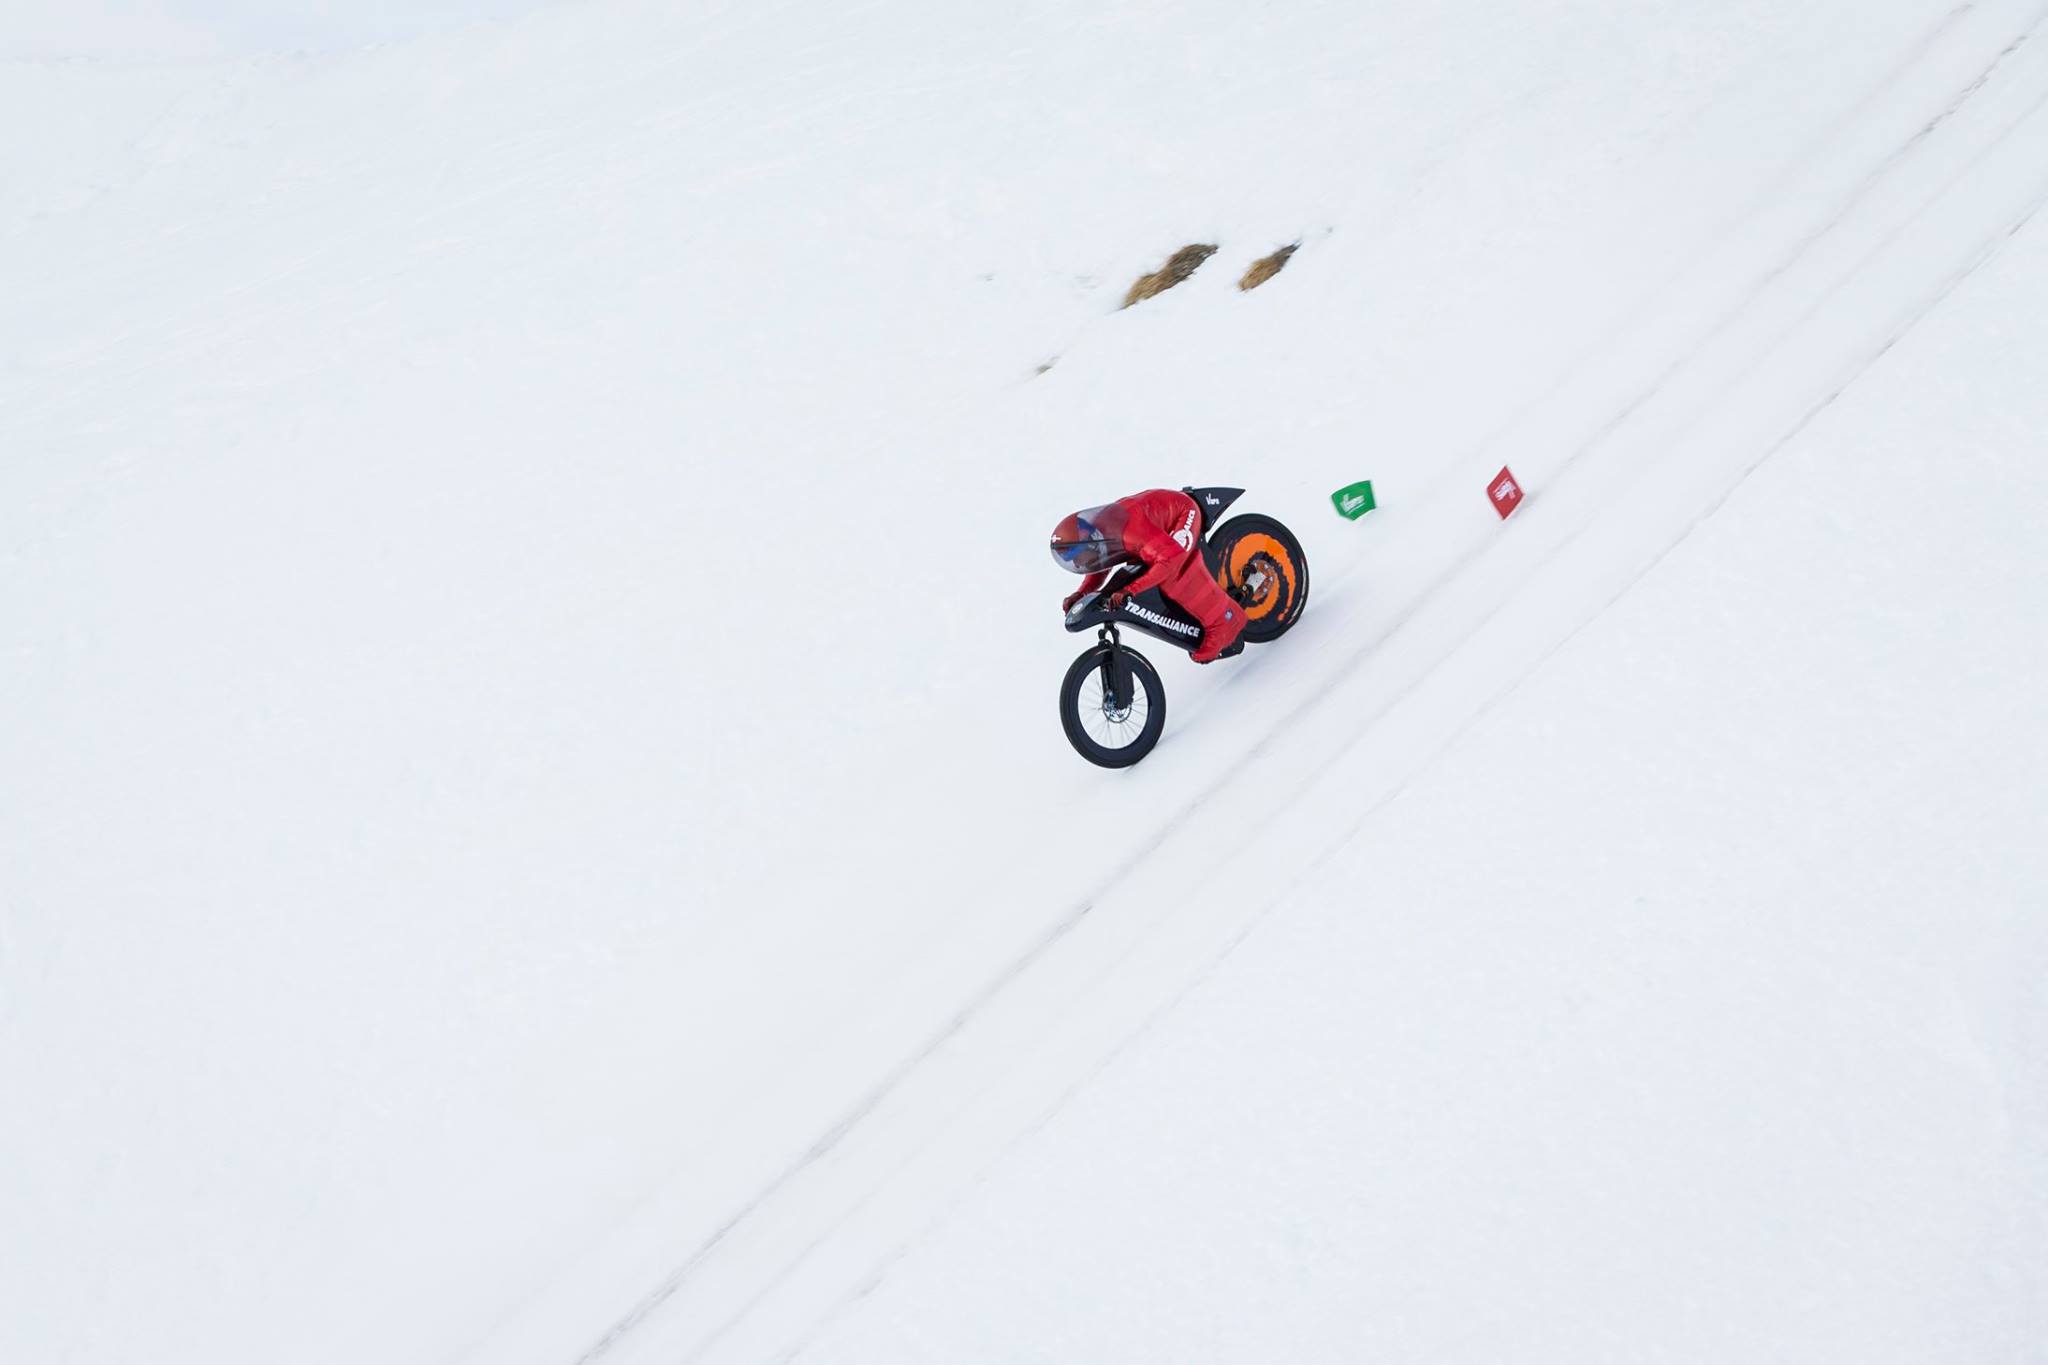 New World Speed Record For a Bike Set on Snow